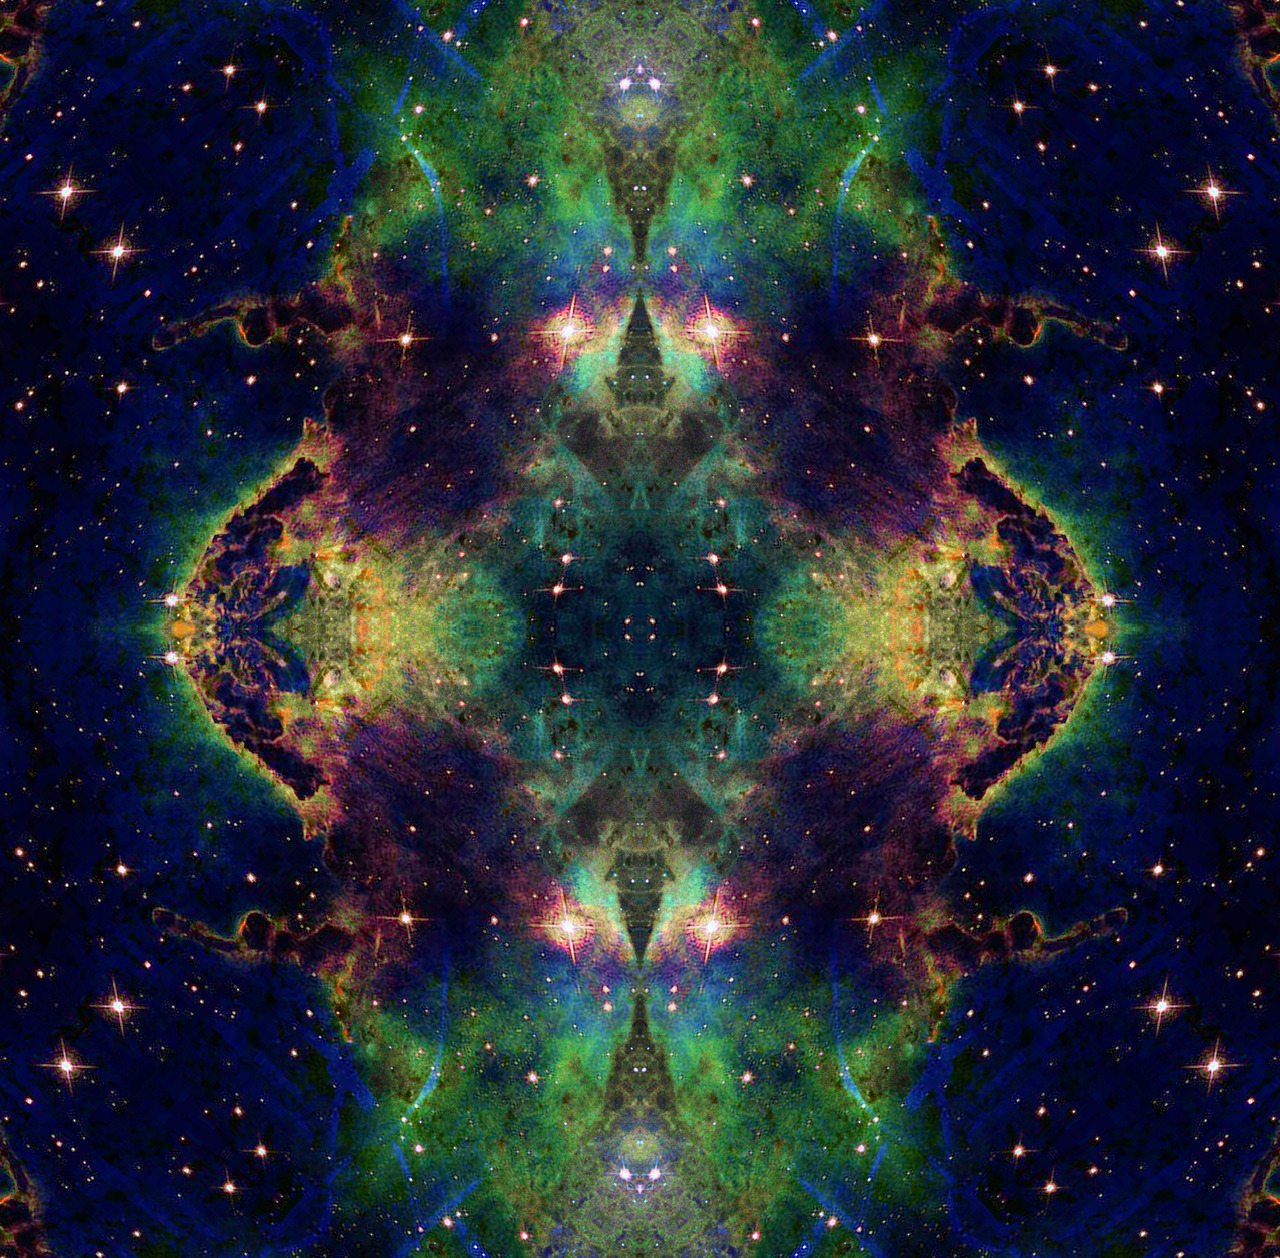 Gallery For gt Cool Trippy Space Backgrounds